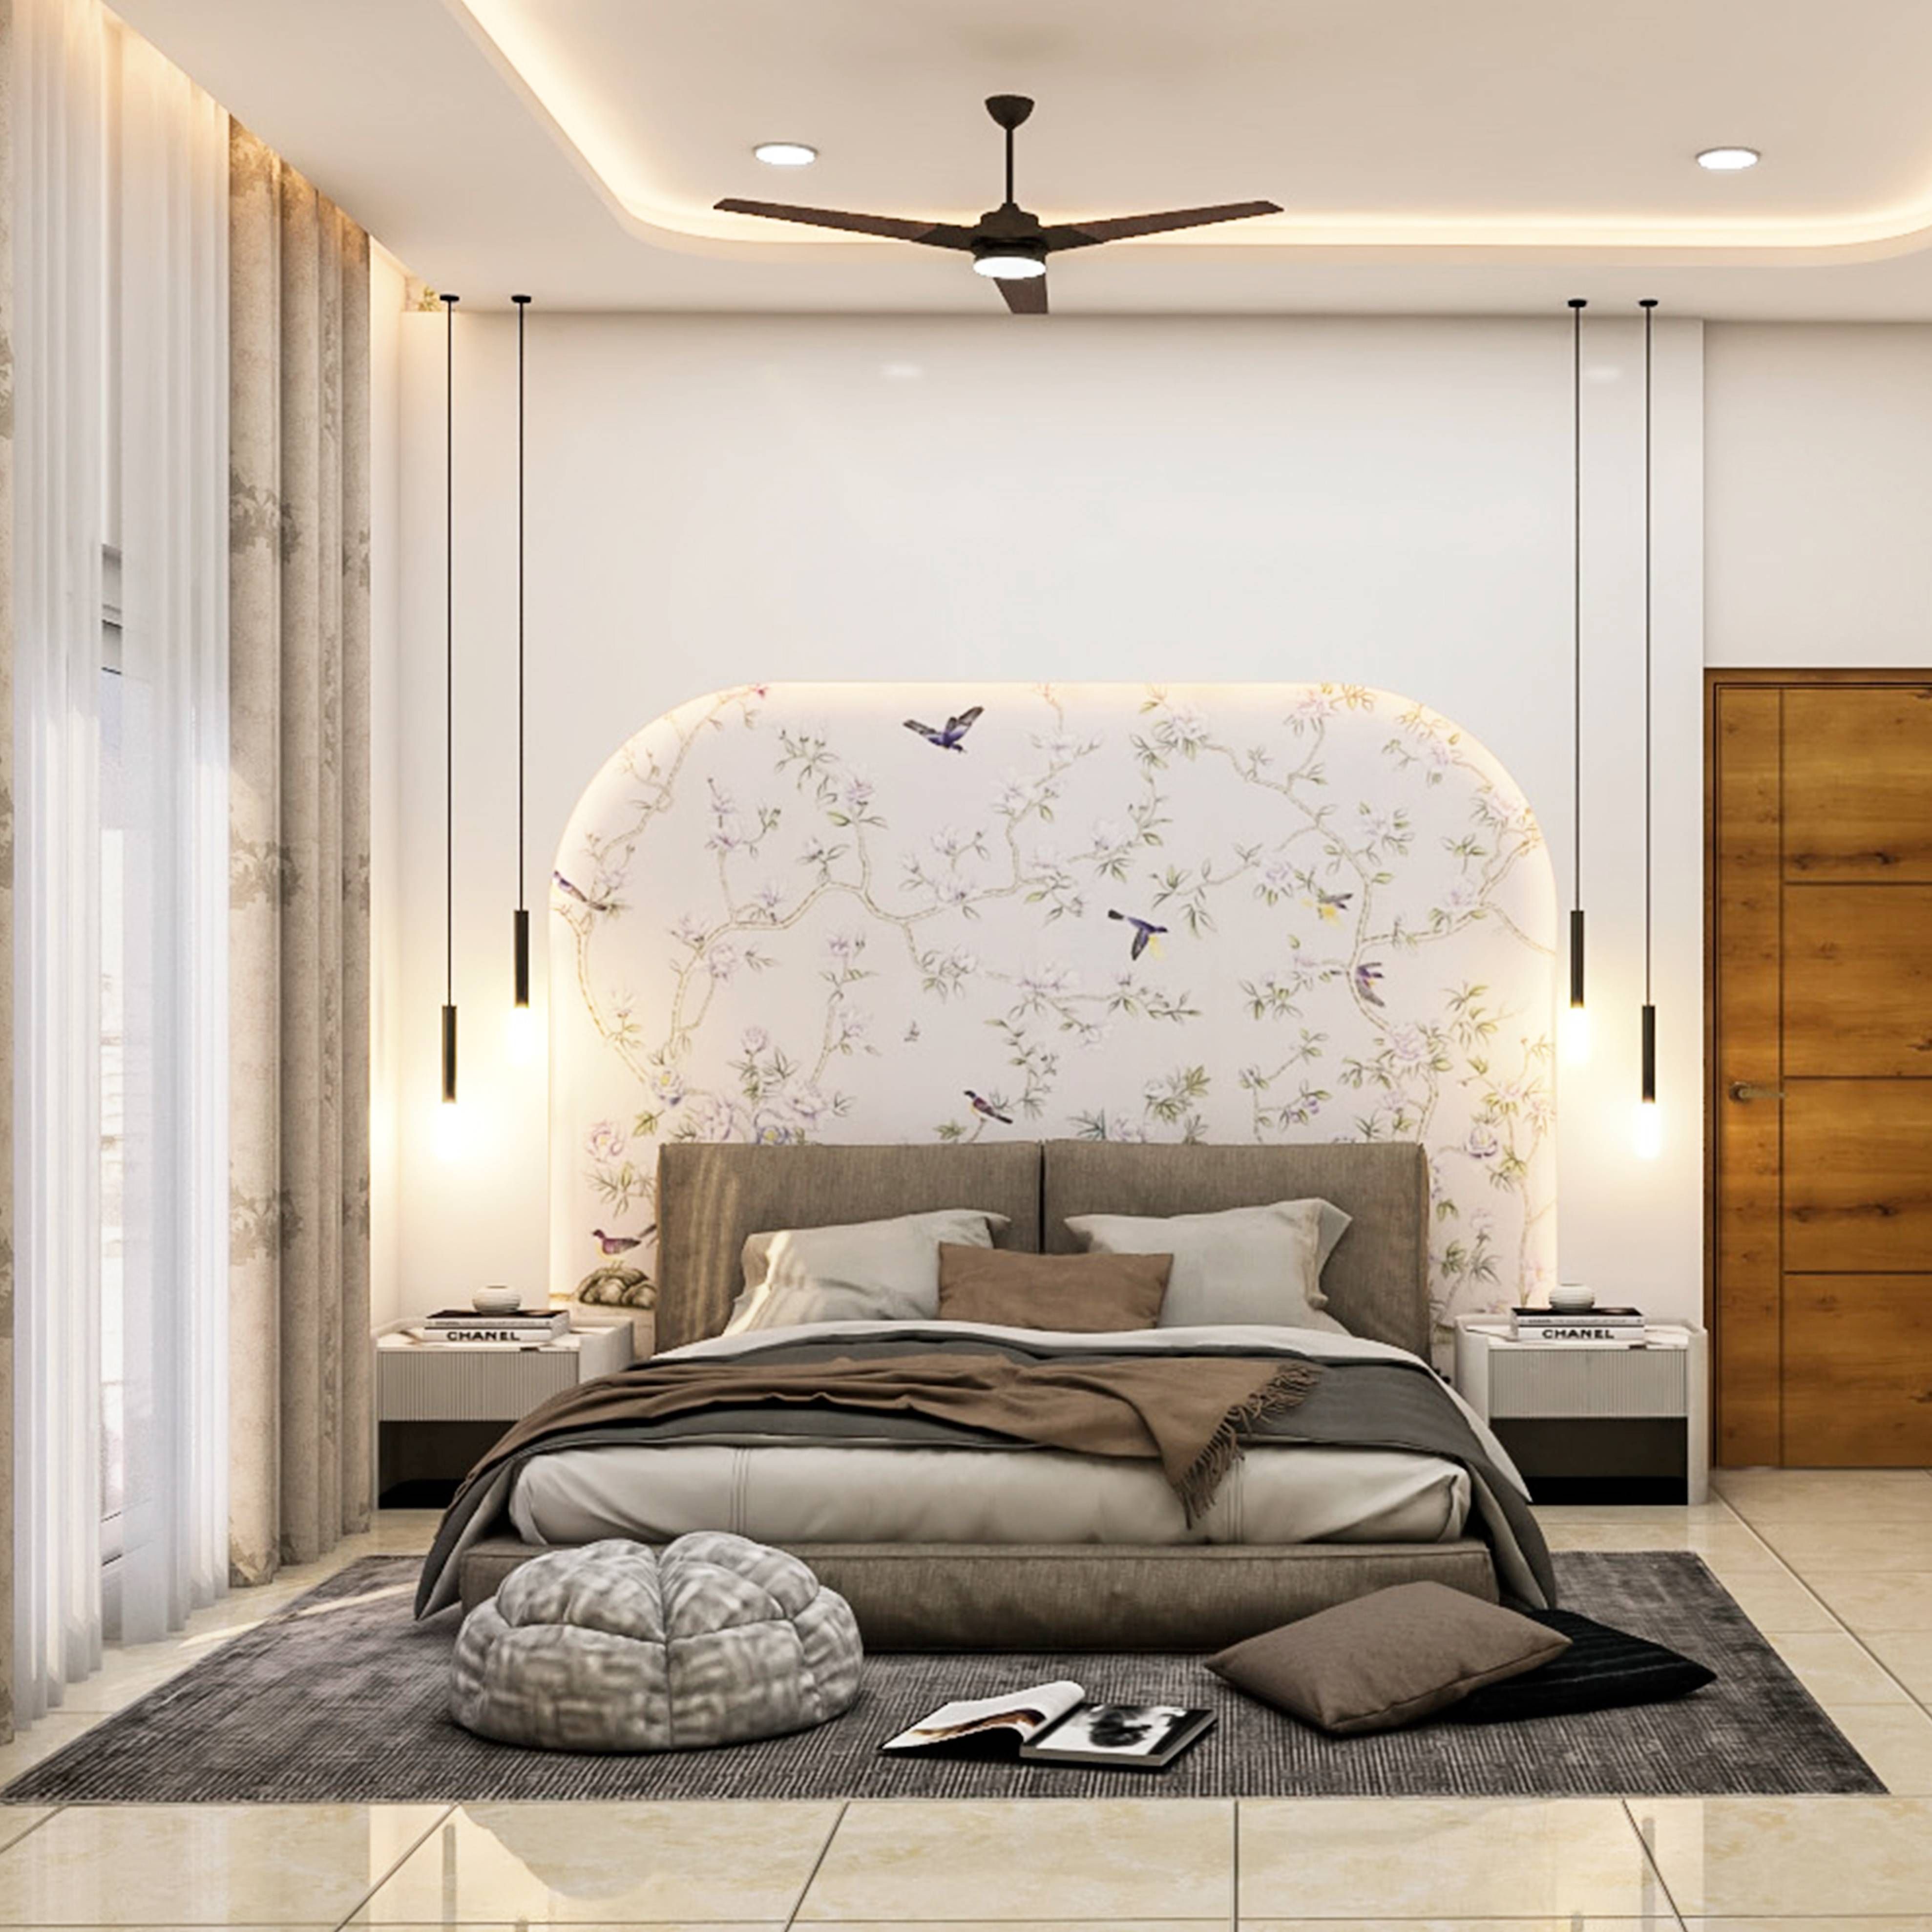 Contemporary Guest Bedroom Design With Patterned Headboard